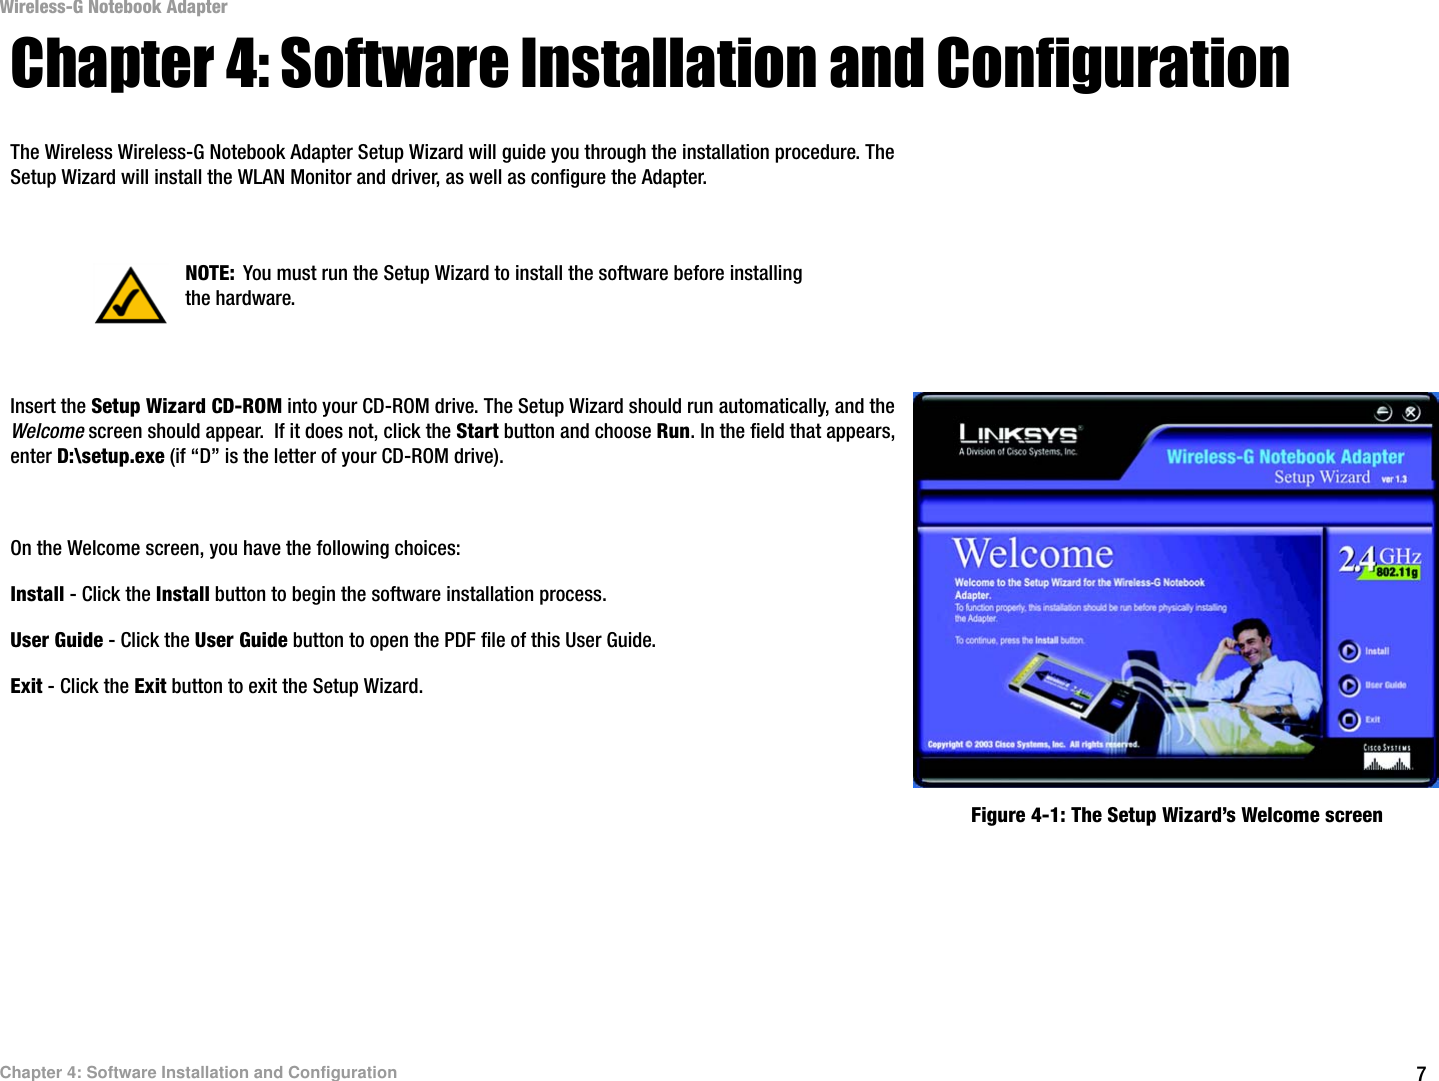 7Chapter 4: Software Installation and ConfigurationWireless-G Notebook AdapterChapter 4: Software Installation and ConfigurationThe Wireless Wireless-G Notebook Adapter Setup Wizard will guide you through the installation procedure. The Setup Wizard will install the WLAN Monitor and driver, as well as configure the Adapter.Insert the Setup Wizard CD-ROM into your CD-ROM drive. The Setup Wizard should run automatically, and the Welcome screen should appear.  If it does not, click the Start button and choose Run. In the field that appears, enter D:\setup.exe (if “D” is the letter of your CD-ROM drive). On the Welcome screen, you have the following choices:Install - Click the Install button to begin the software installation process. User Guide - Click the User Guide button to open the PDF file of this User Guide. Exit - Click the Exit button to exit the Setup Wizard.NOTE: You must run the Setup Wizard to install the software before installing the hardware.Figure 4-1: The Setup Wizard’s Welcome screen